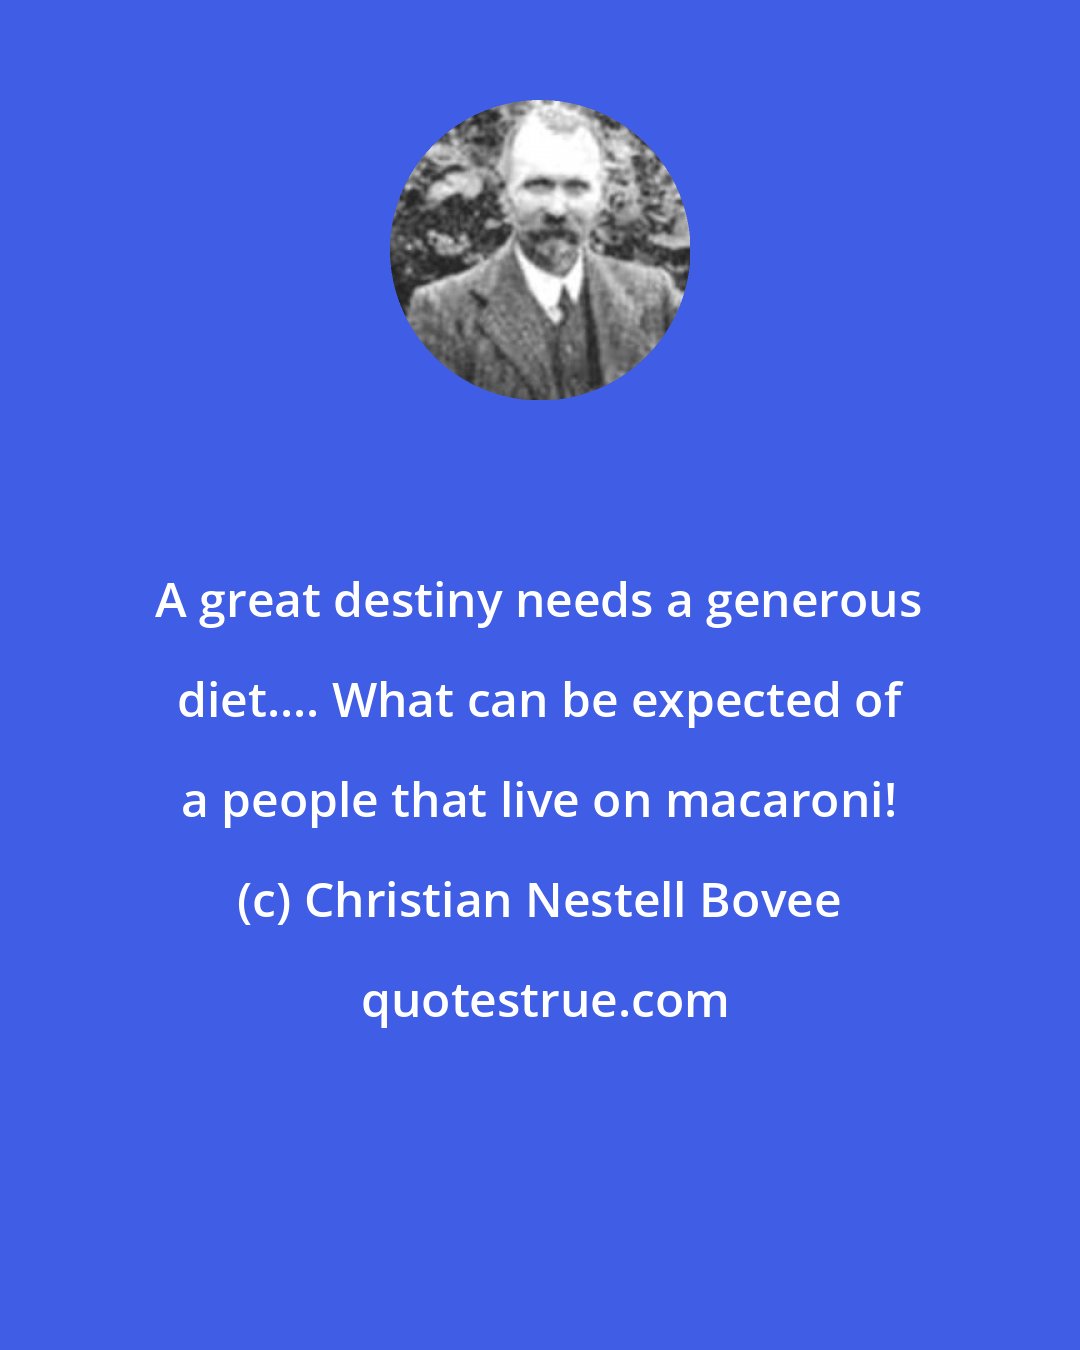 Christian Nestell Bovee: A great destiny needs a generous diet.... What can be expected of a people that live on macaroni!